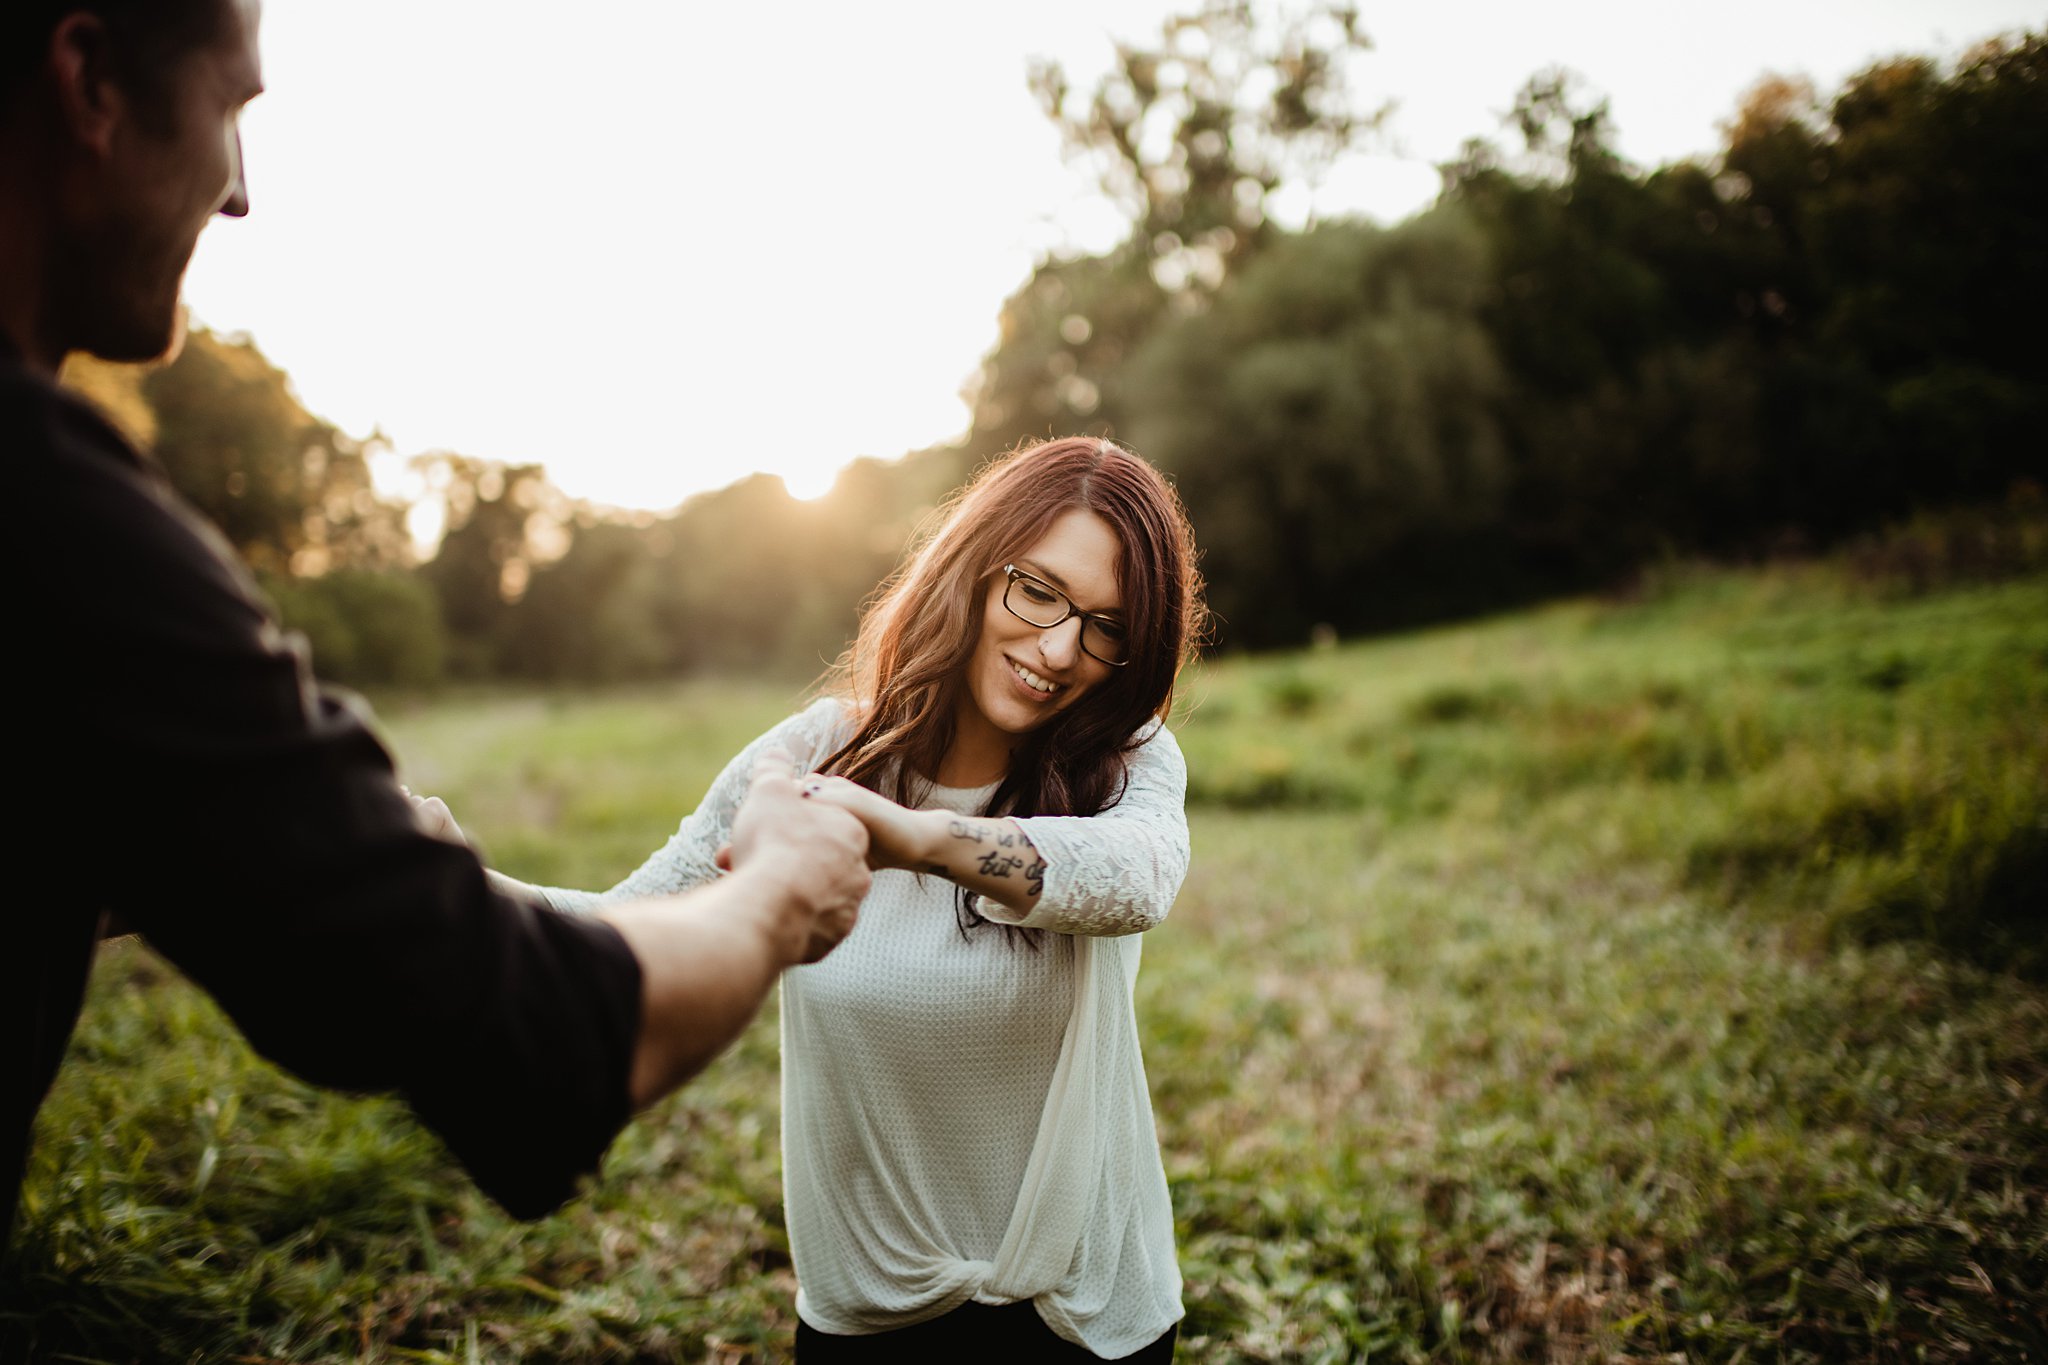 Tattoos and Summertime Love: A Stunning Engagement Session in Viroqua, WI